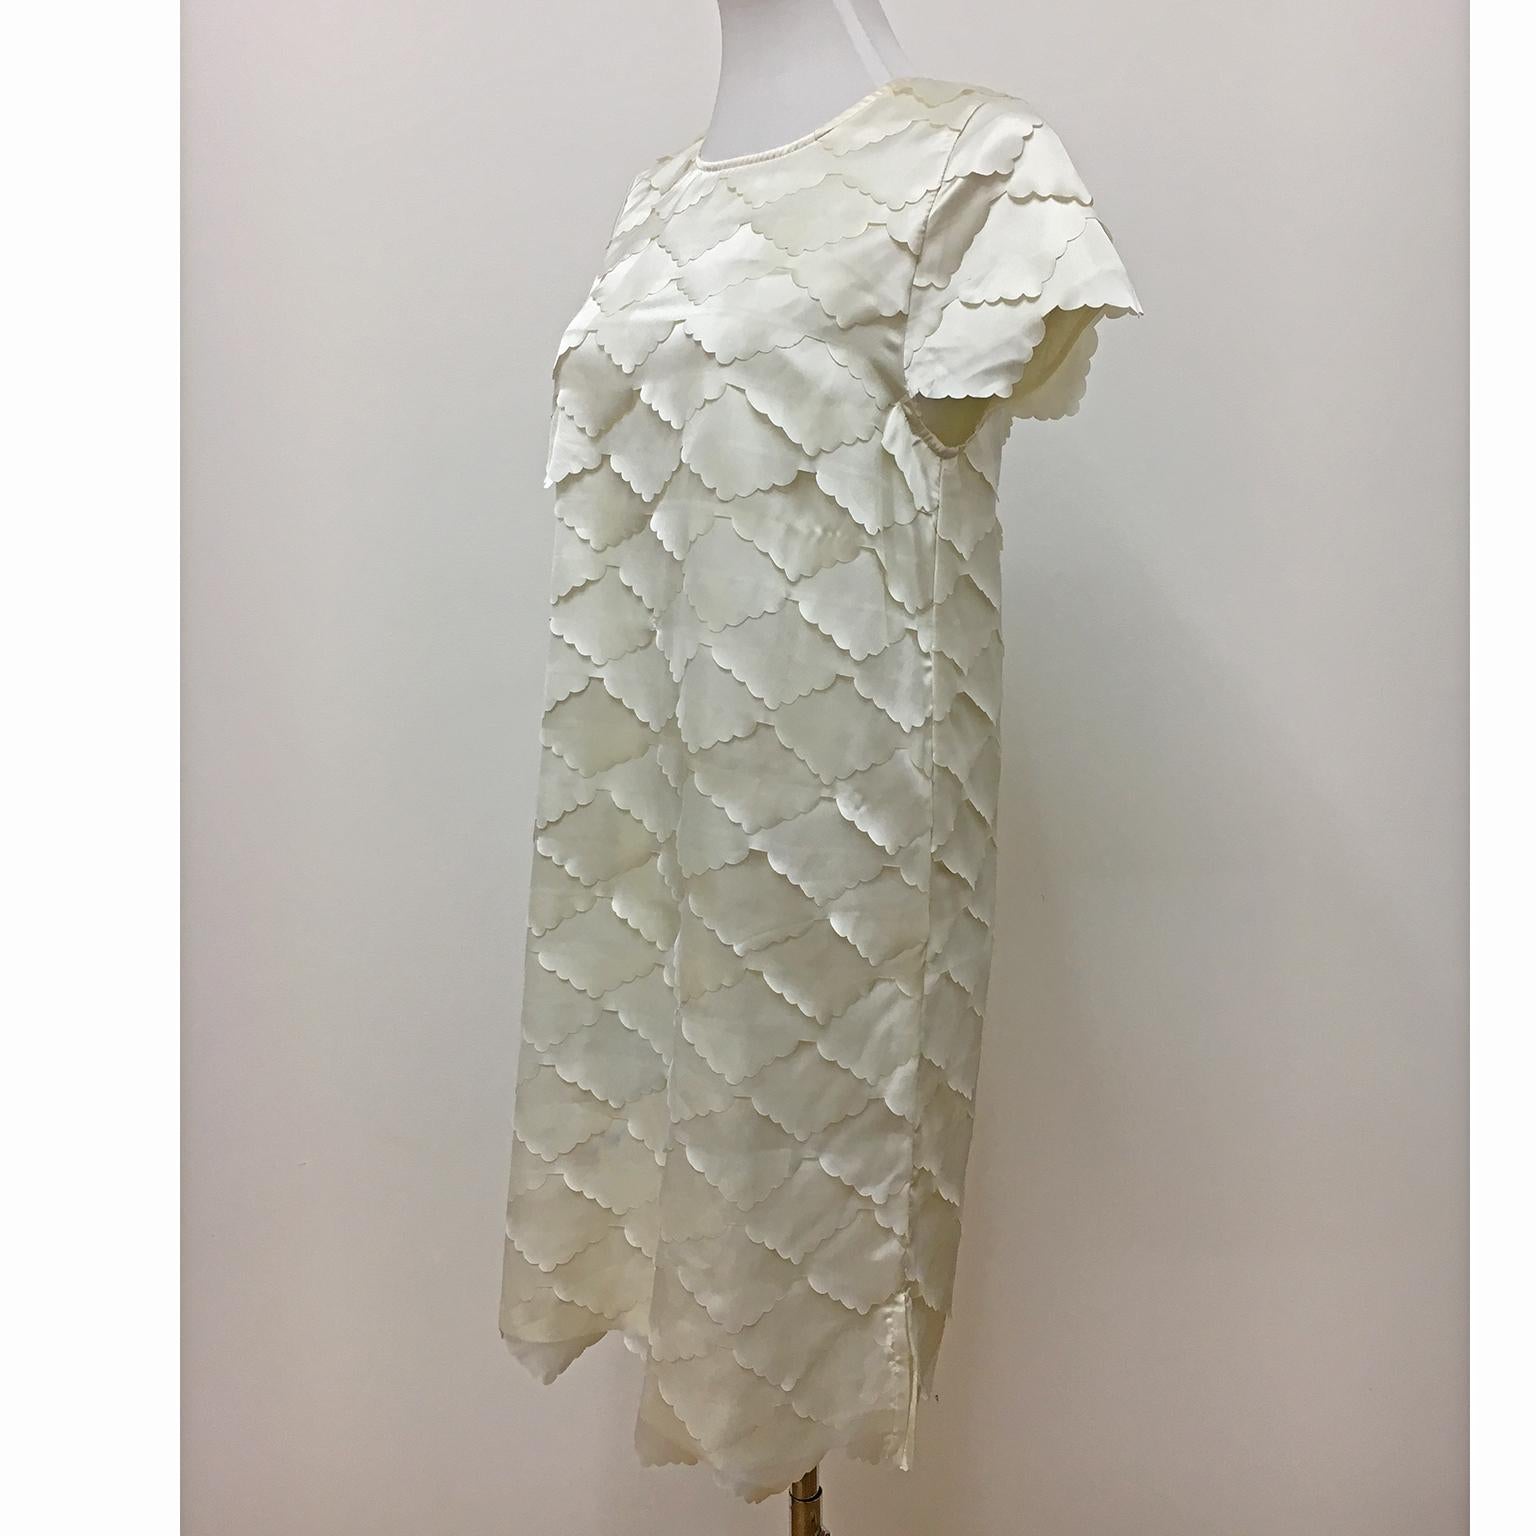 Beautiful white mini dress from circa 1960s.
This truly unique no name designer dress has mermaid's like shine laser cut lace directly sewn to the dress. Very well shaped.
Fits like size 36 EU / 4-6 US